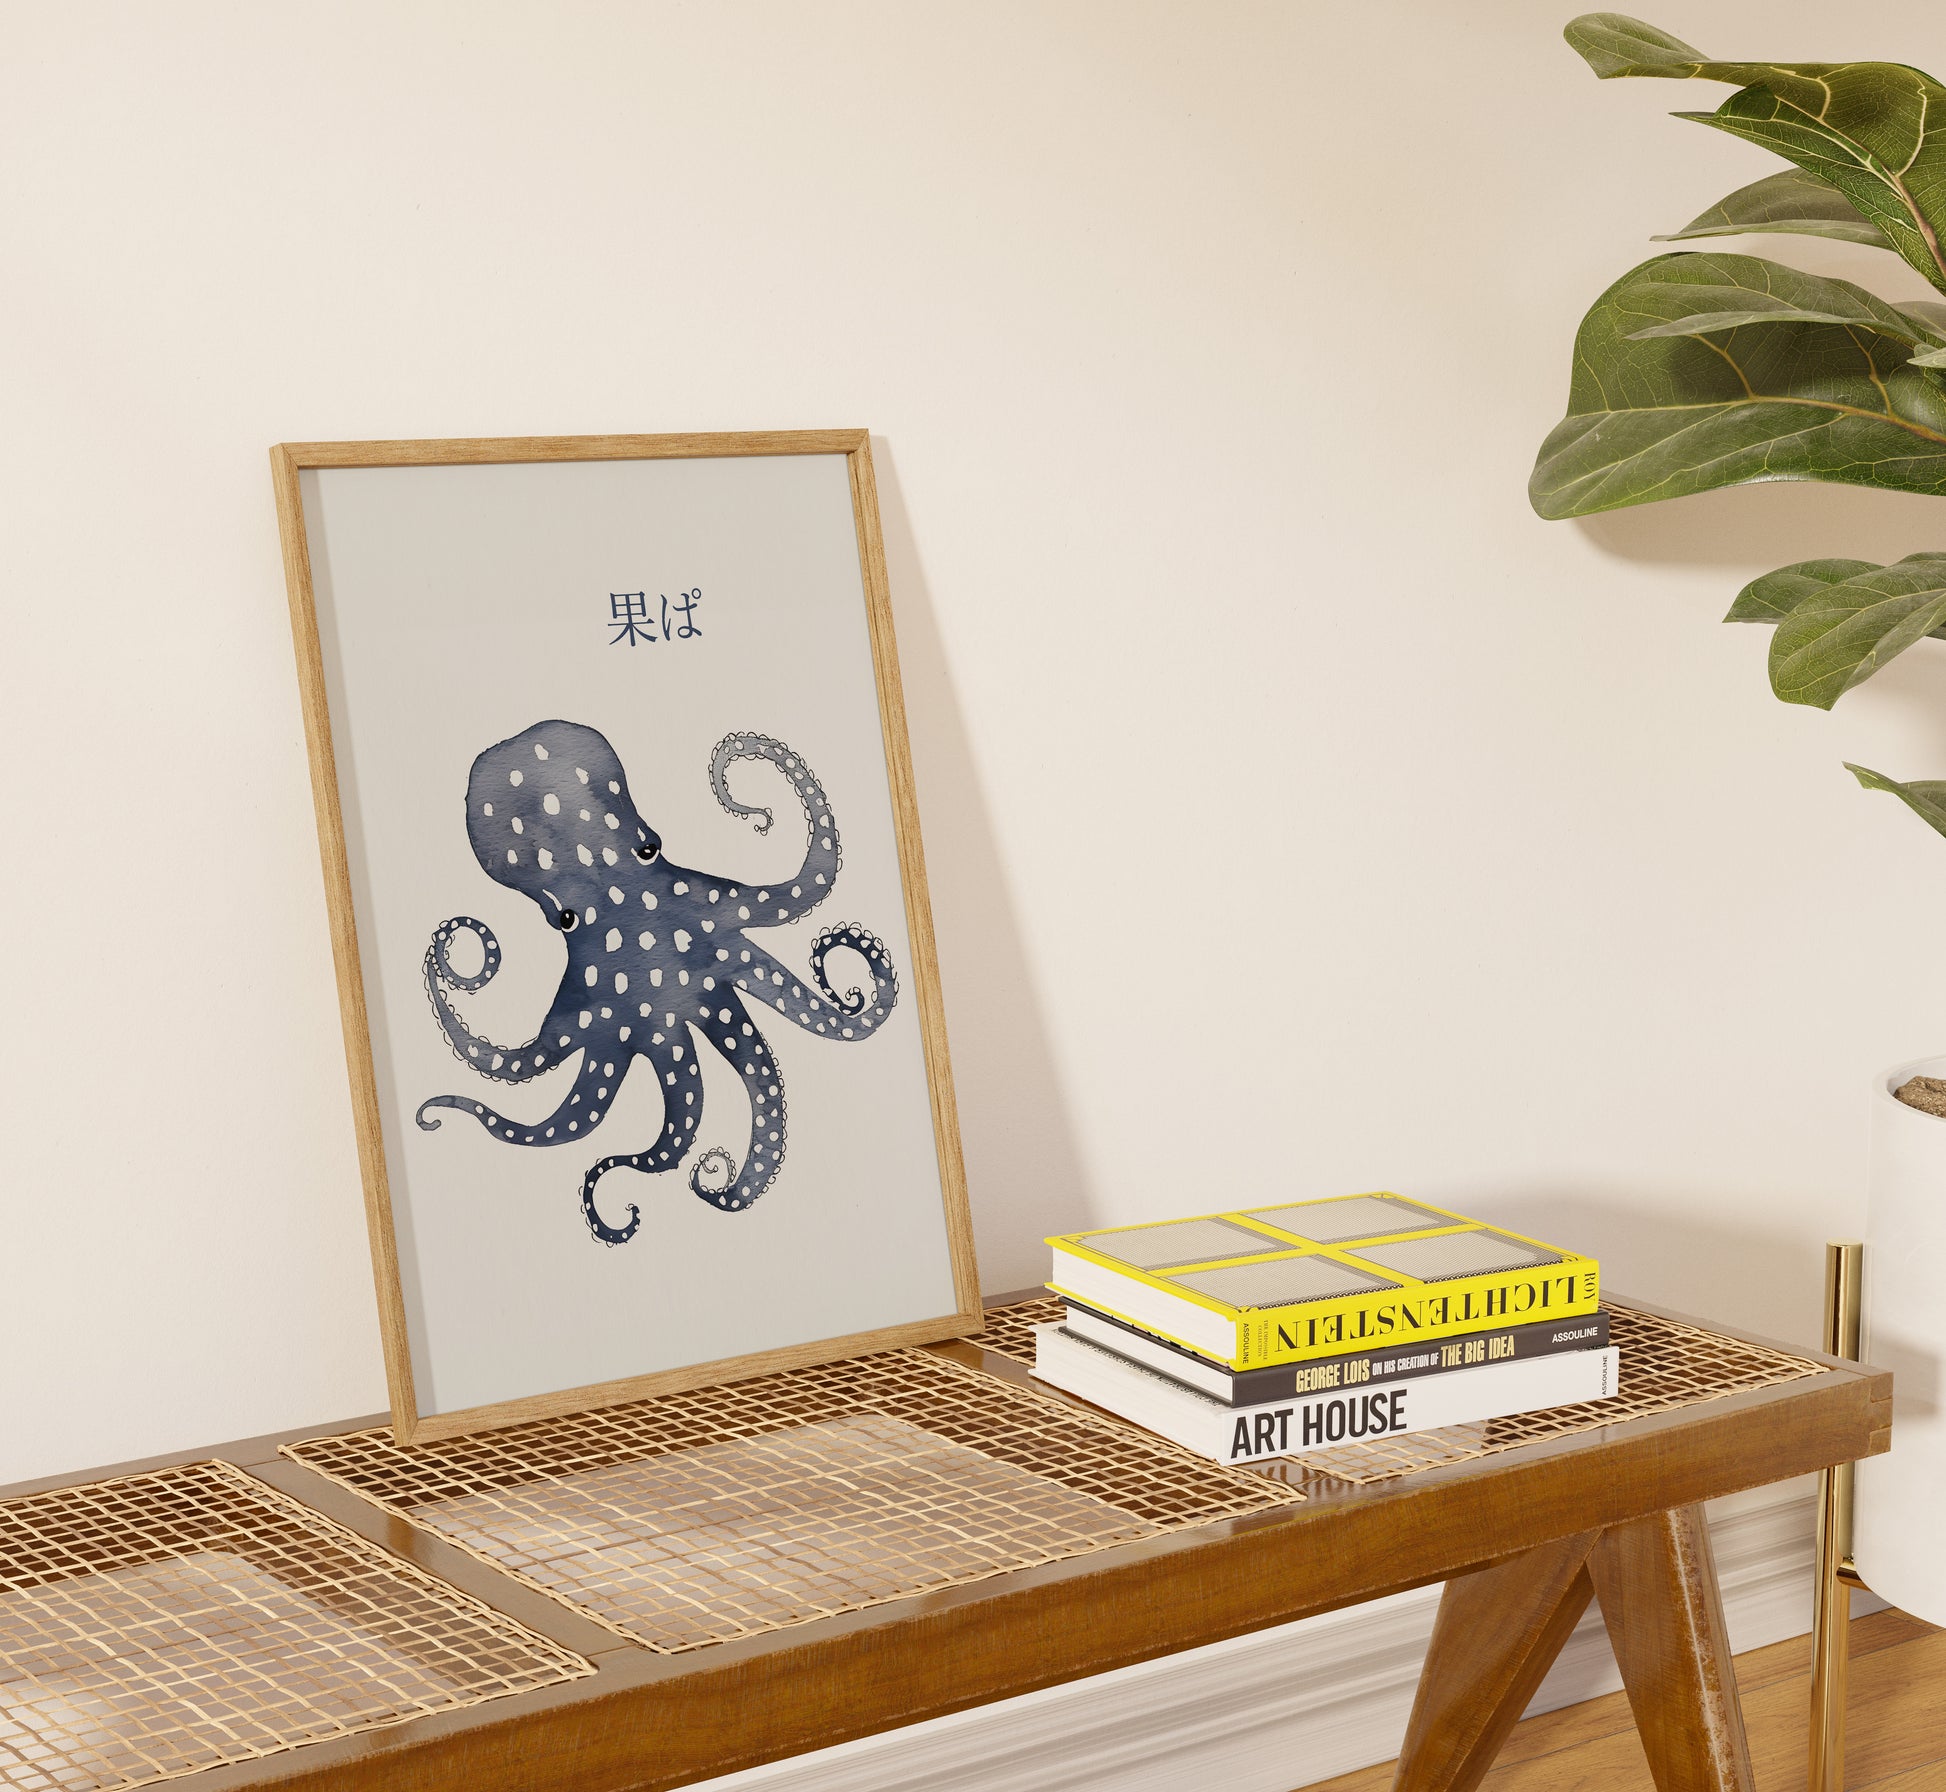 Framed octopus illustration on a shelf beside books and a plant.